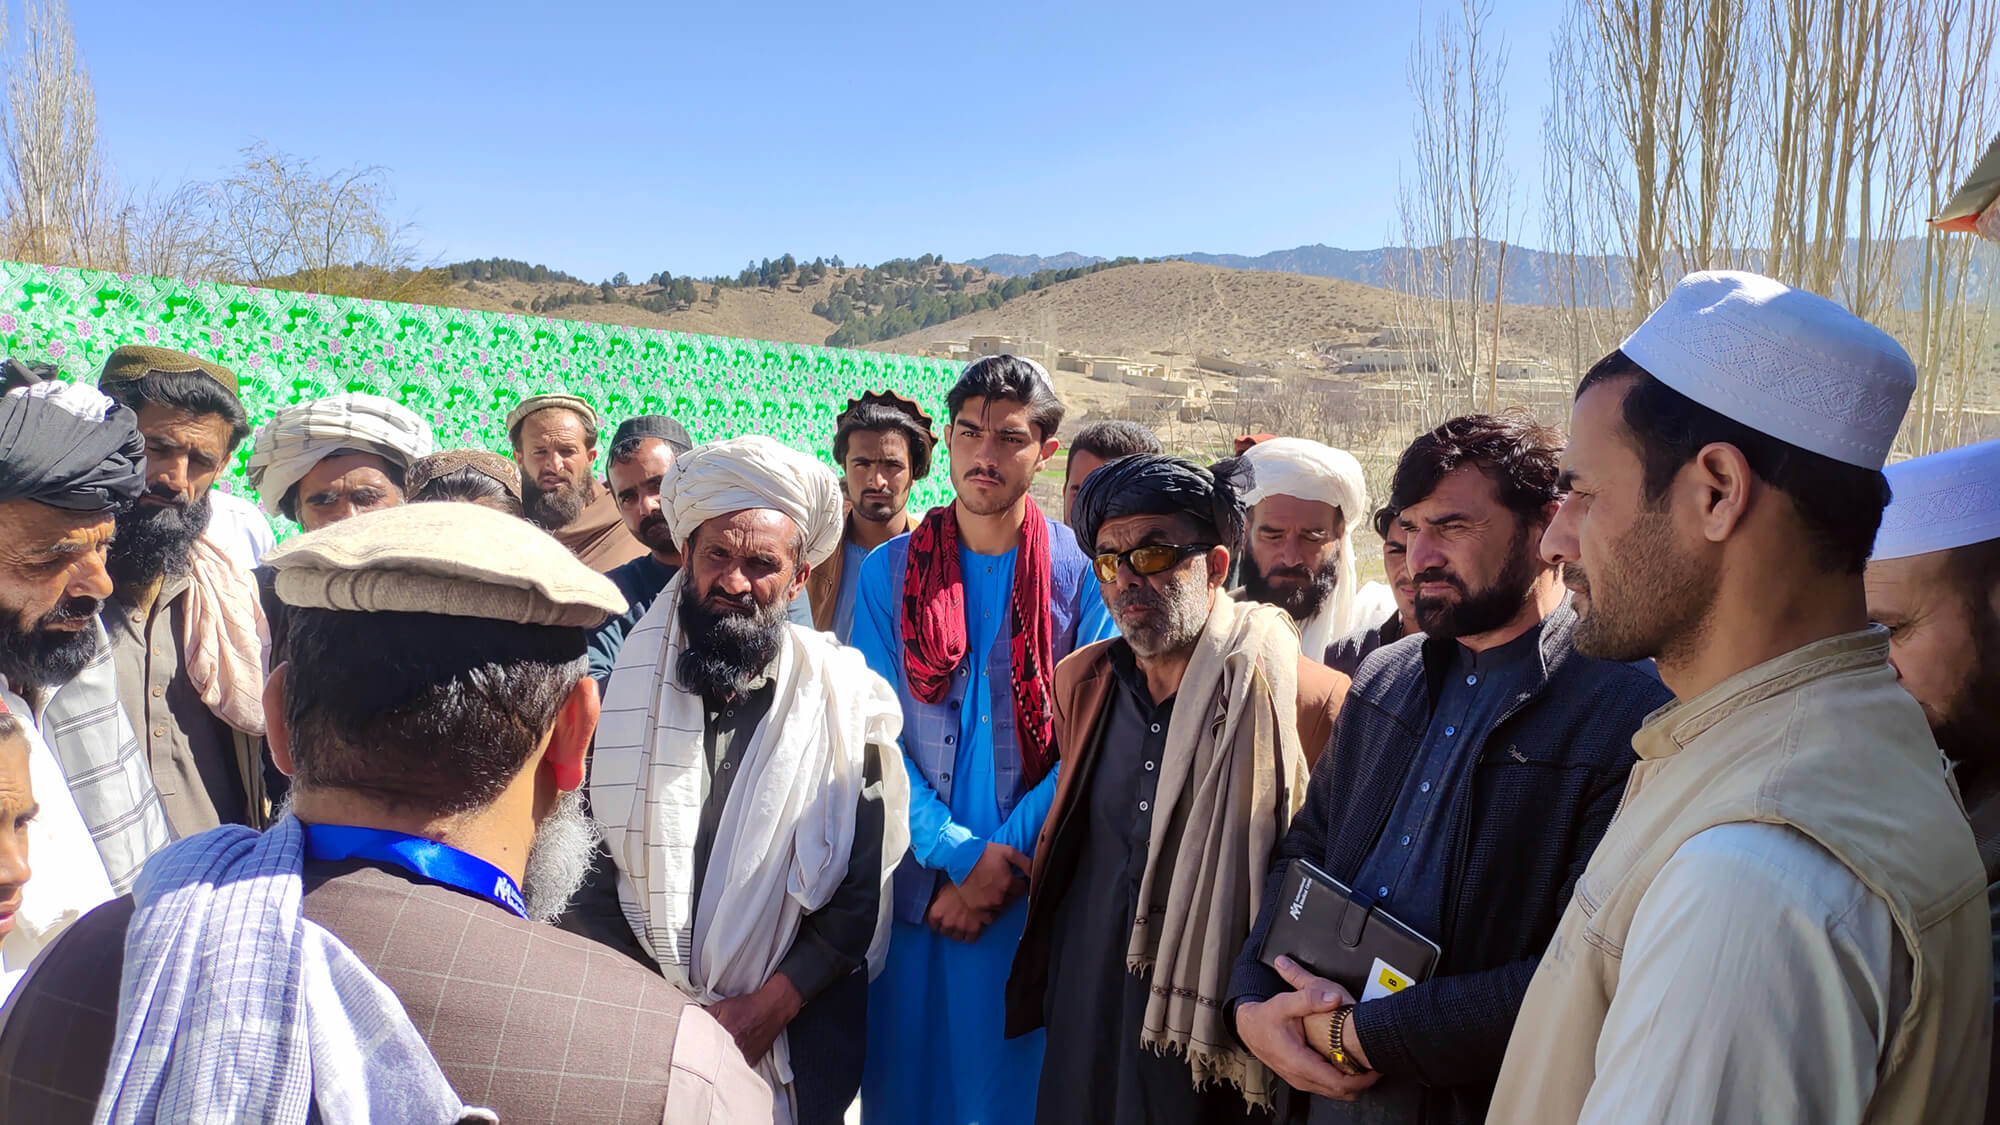 Dr. Mohammad Zahir Khan, Programme Coordinator in Afghanistan, explains the situation in Paktika province and why International Medical Corps established the new health clinics.